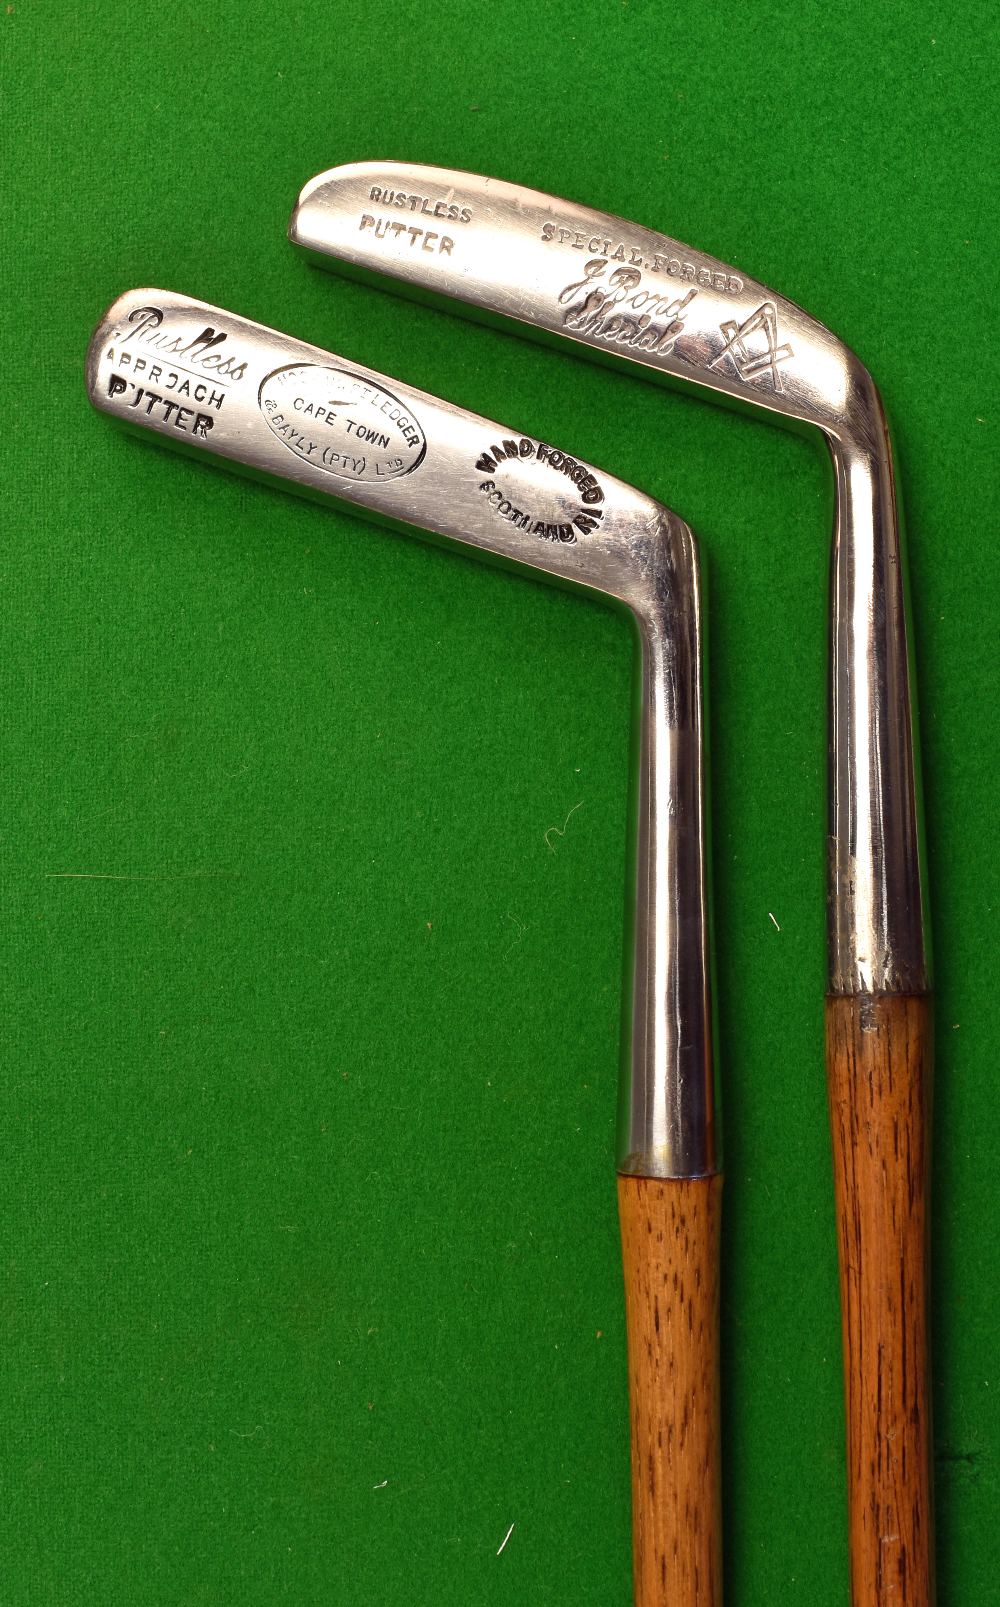 2x Interesting Putters - Hooking St Ledger and Bayley Cape Town Approach Putter with wide sole and